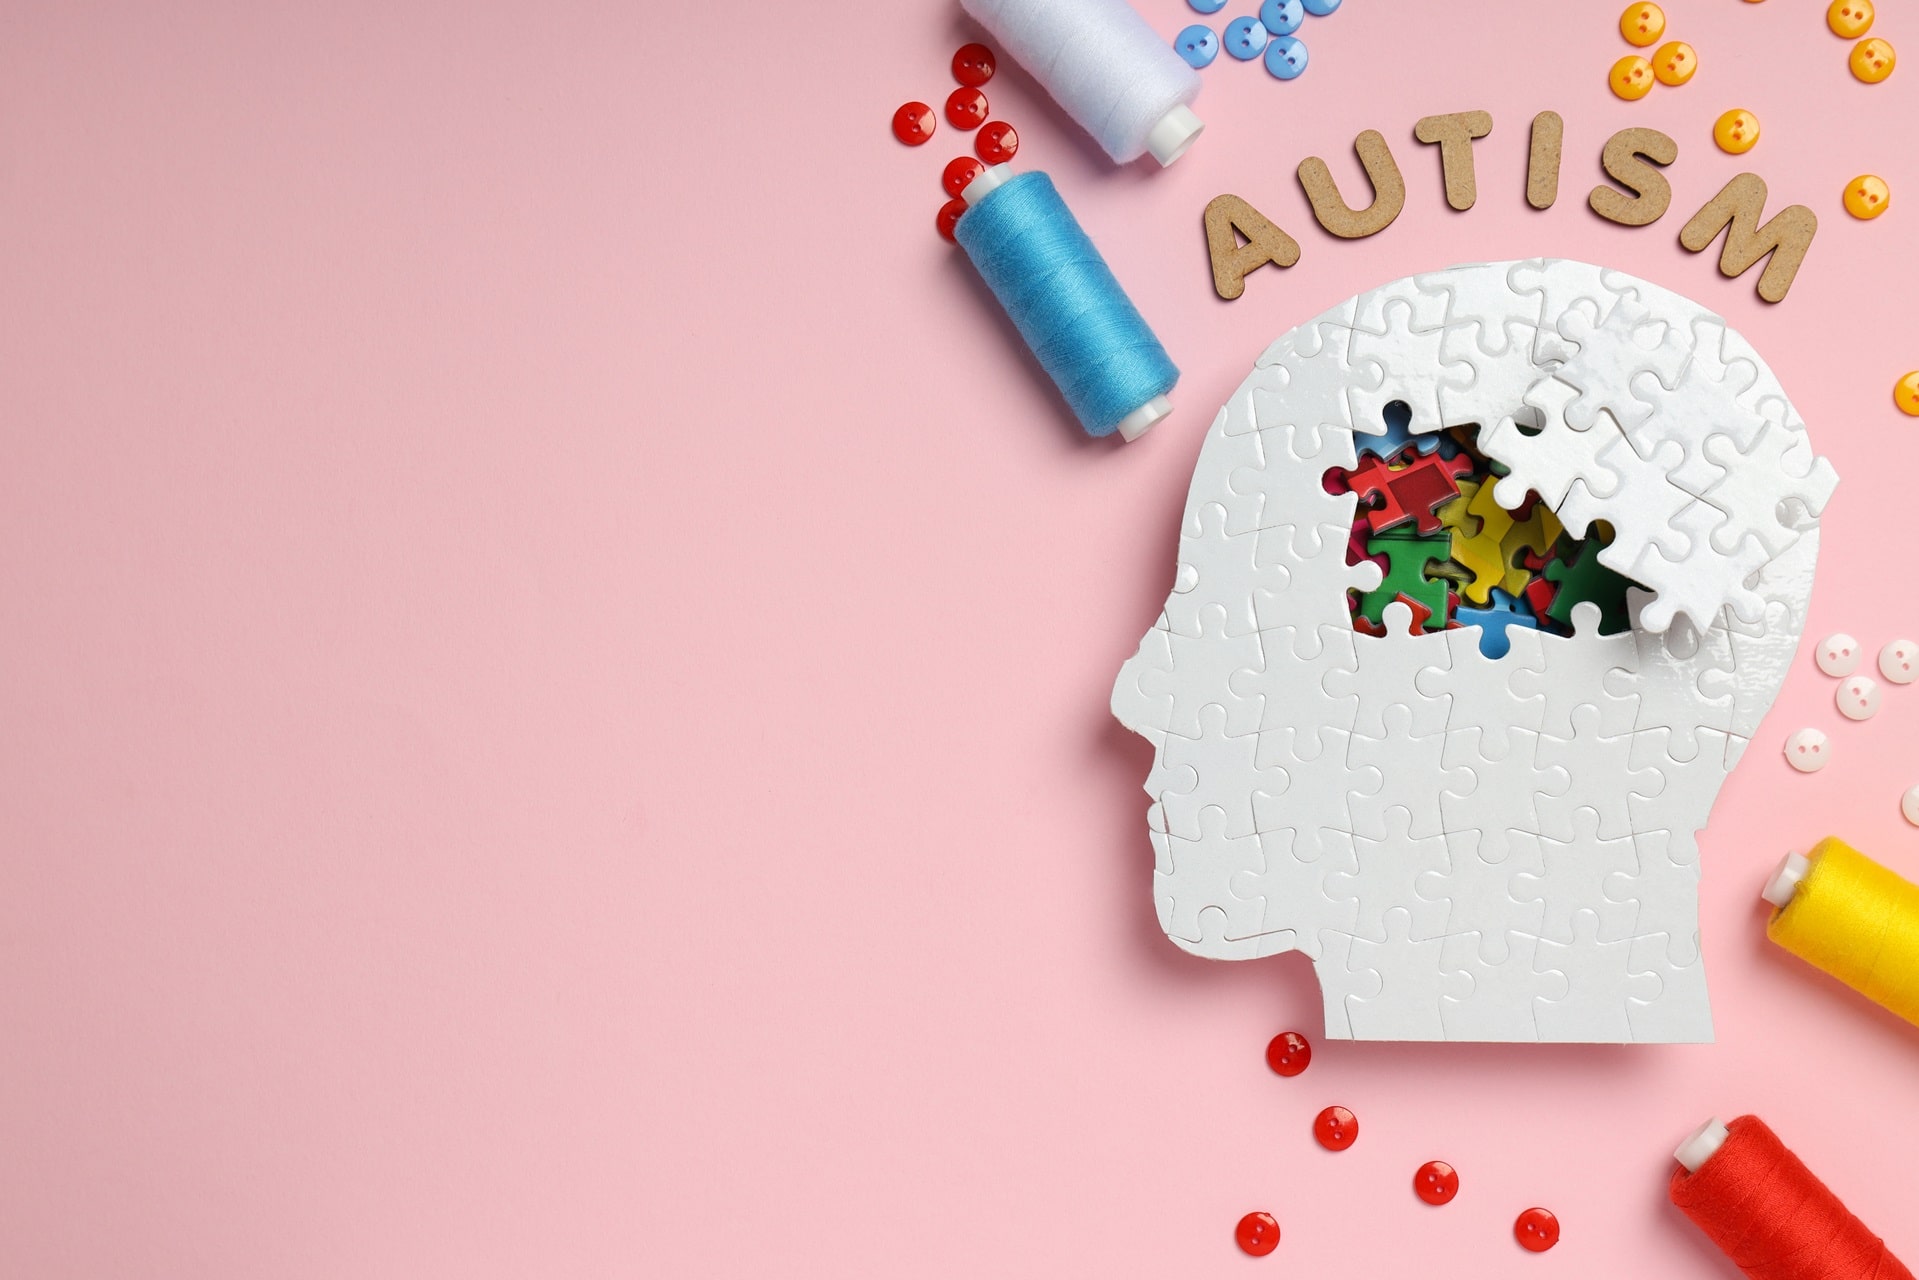 At what age does autism spectrum disorder appear?